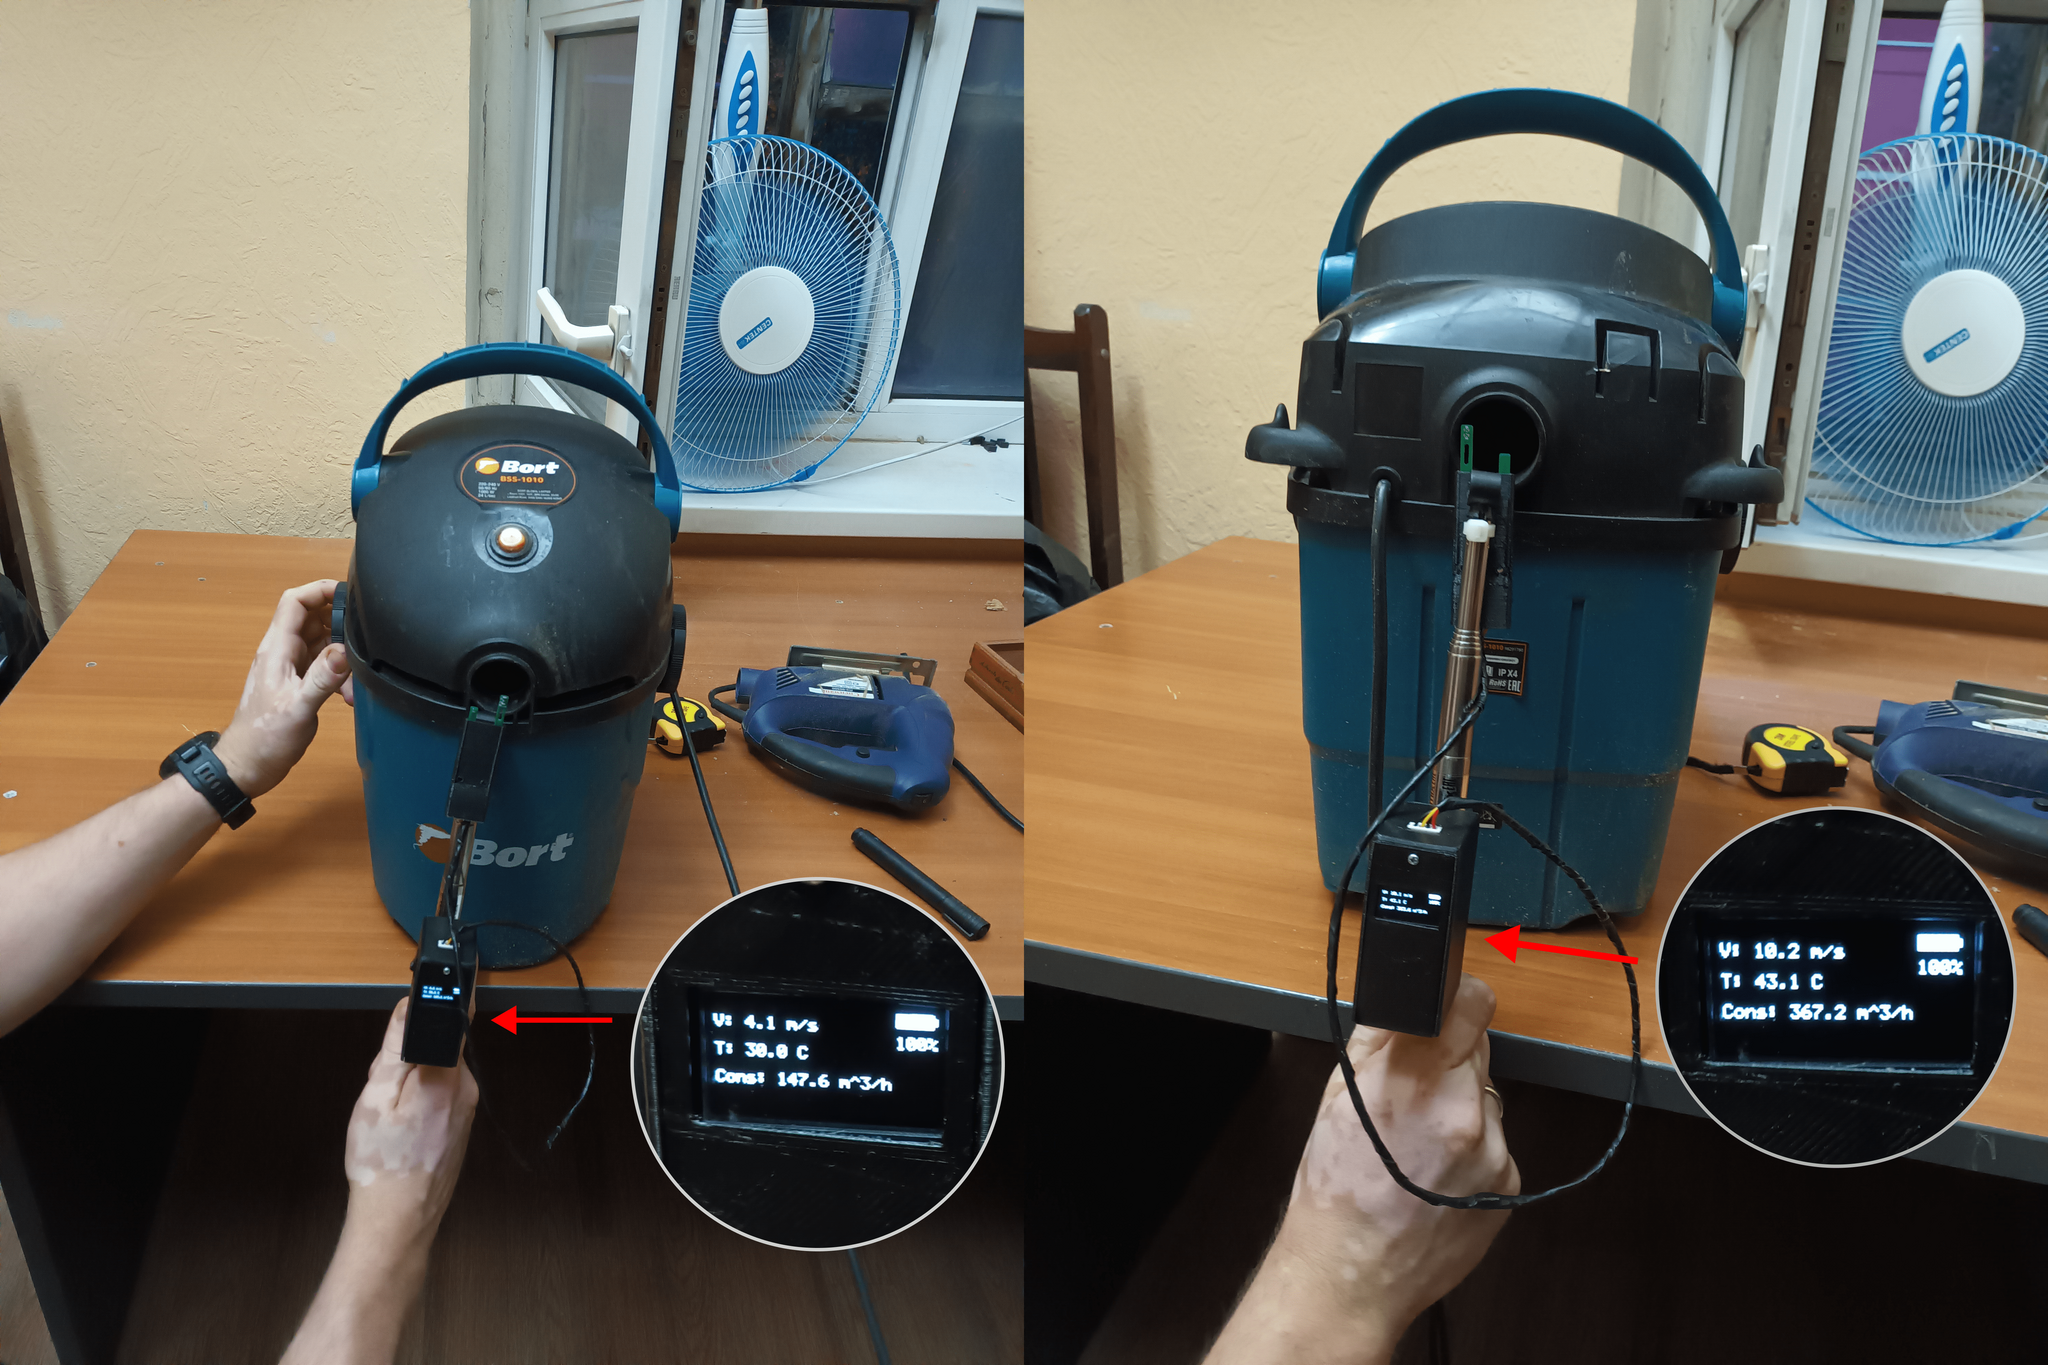 DIY hot-wire anemometer: we assemble a do-it-yourself airflow speed and temperature sensor - My, Programming, Technics, Electronics, Homemade, Technologies, With your own hands, Arduino, Esp8266, Measurements, Constructor, Longpost